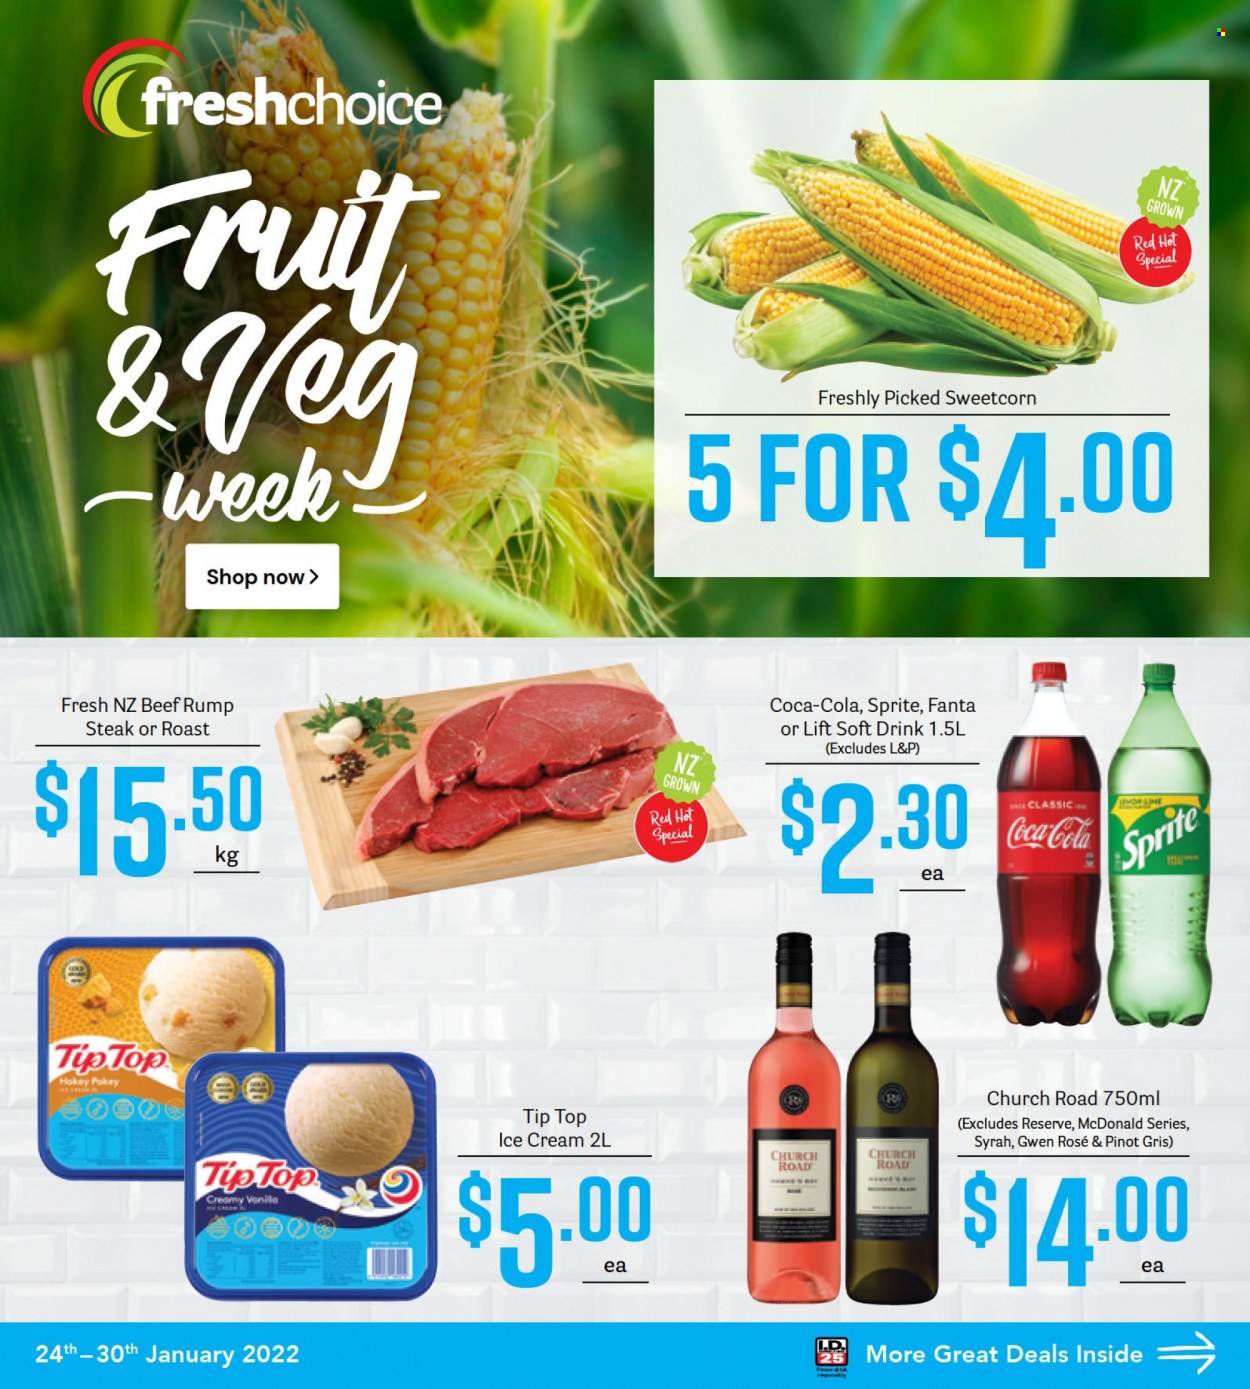 thumbnail - Fresh Choice mailer - 24.01.2022 - 30.01.2022 - Sales products - Tip Top, ice cream, Coca-Cola, Sprite, Fanta, soft drink, L&P, red wine, white wine, wine, Syrah, Pinot Grigio, rosé wine, steak, rose. Page 1.